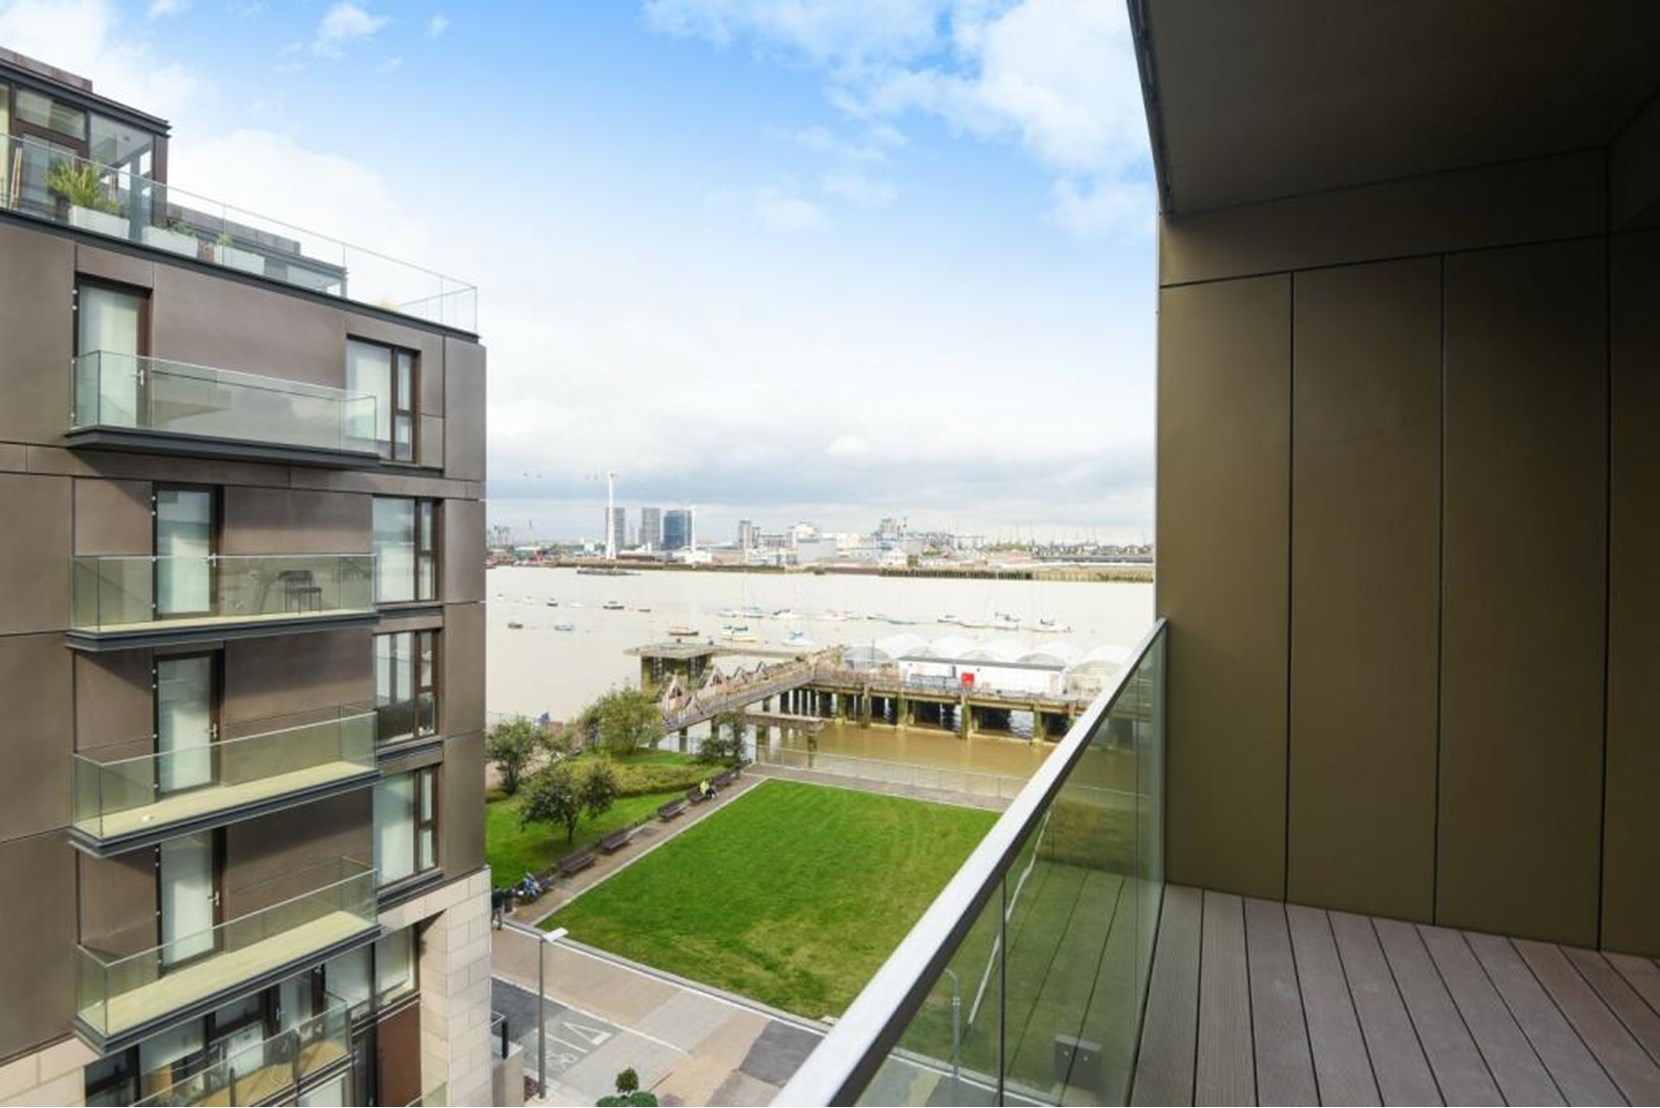 Apartments to Rent by Greenwich Peninsula at The Lighterman, Greenwich, SE10, private balcony